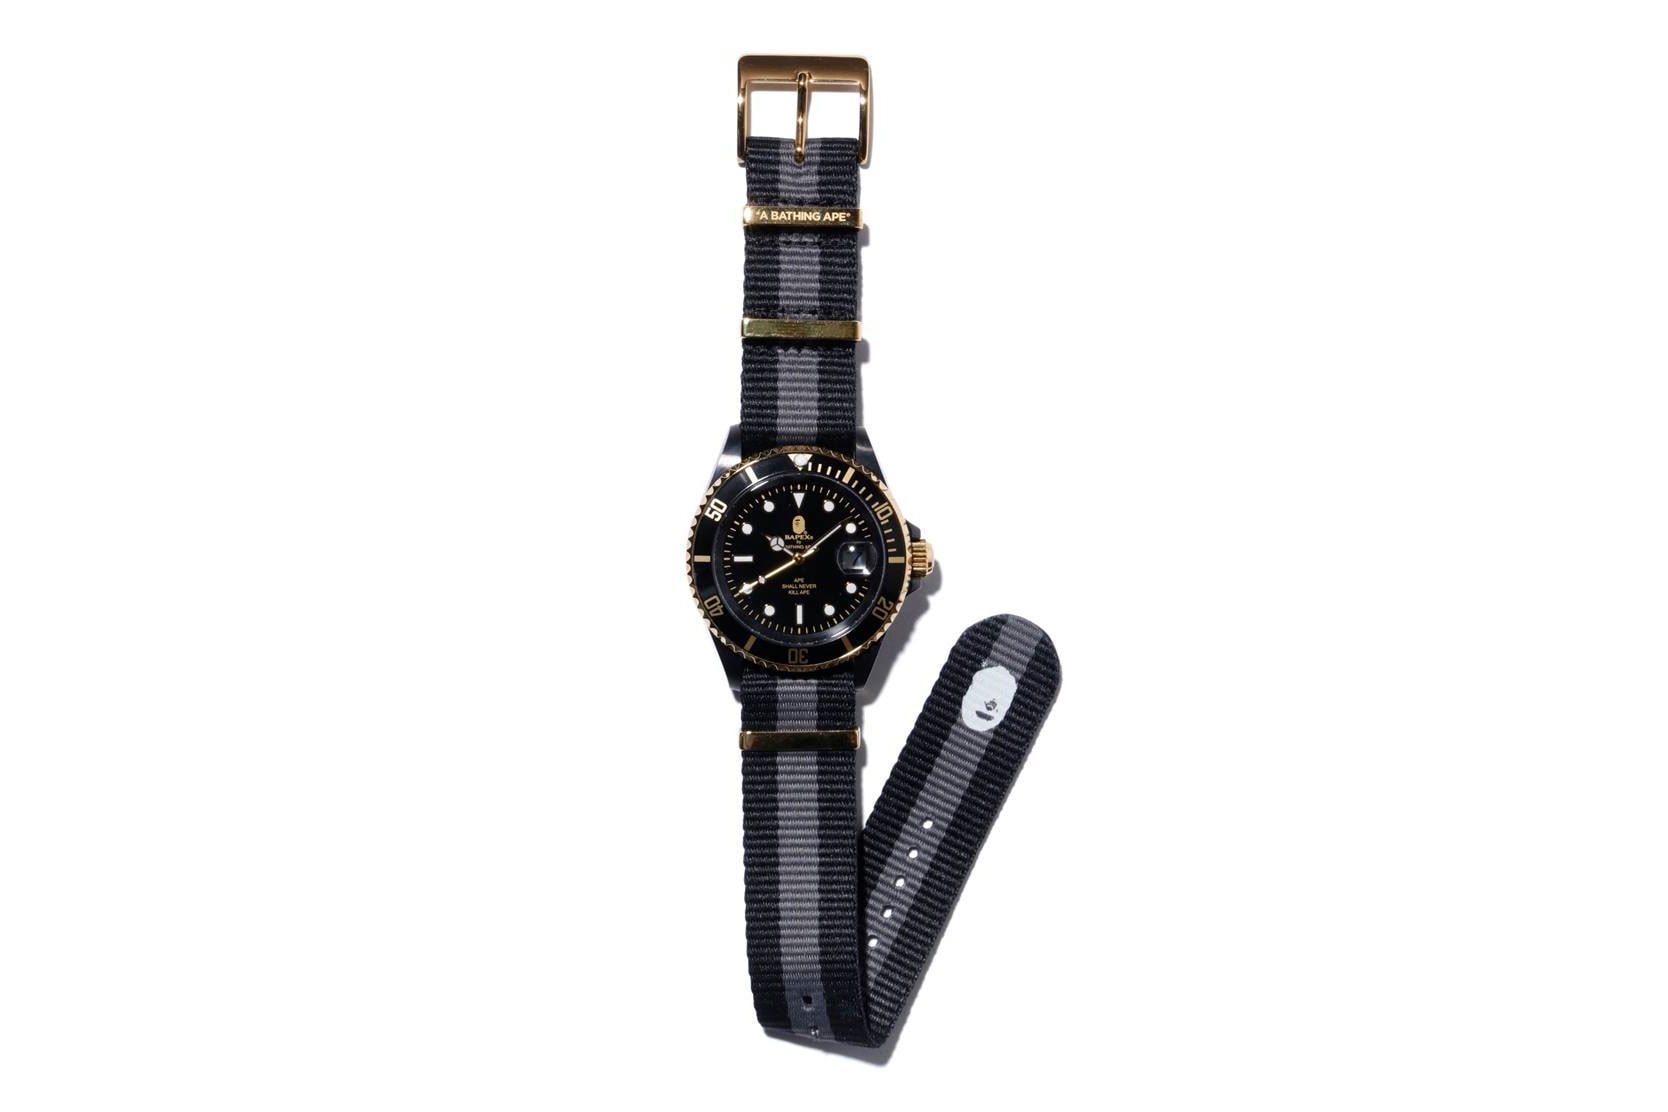 BAPE Type 1 BAPEX With NATO Straps Release a bathing ape timepieces watches accessories black and gold ape head